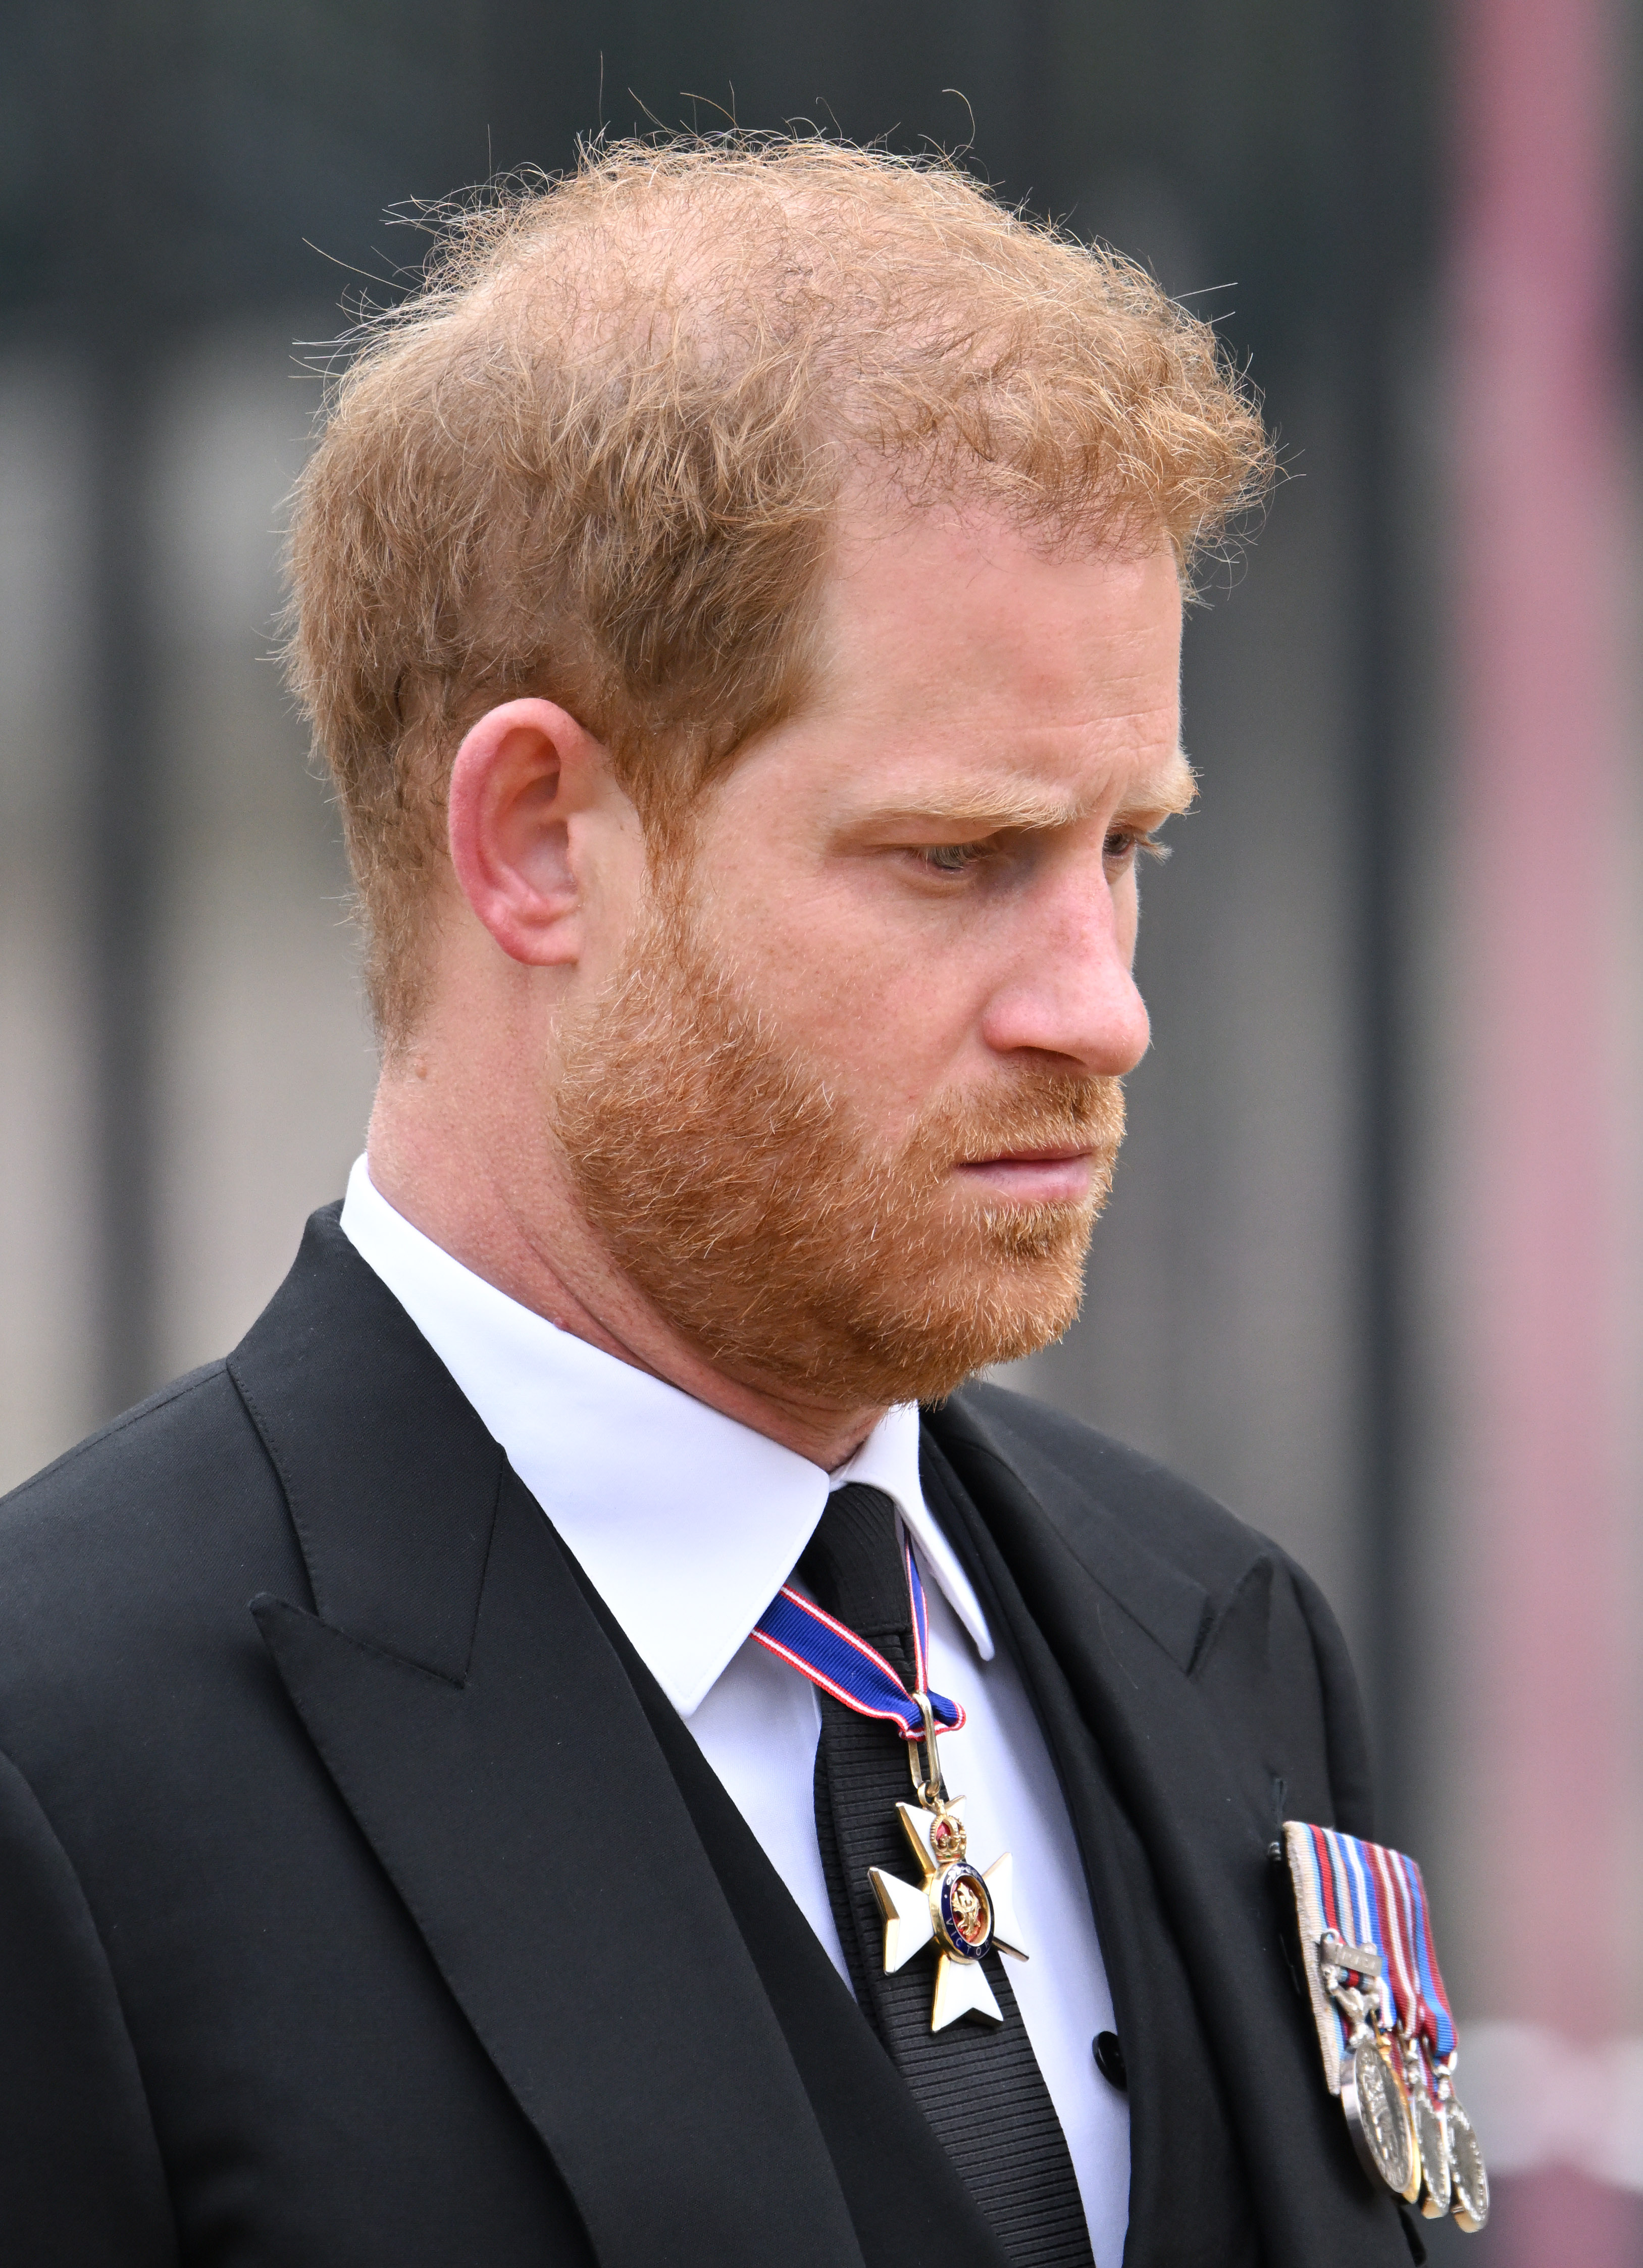 Prince Harry during the State Funeral of Queen Elizabeth II at Westminster Abbey on September 19, 2022 in London, England. | Source: Getty Images